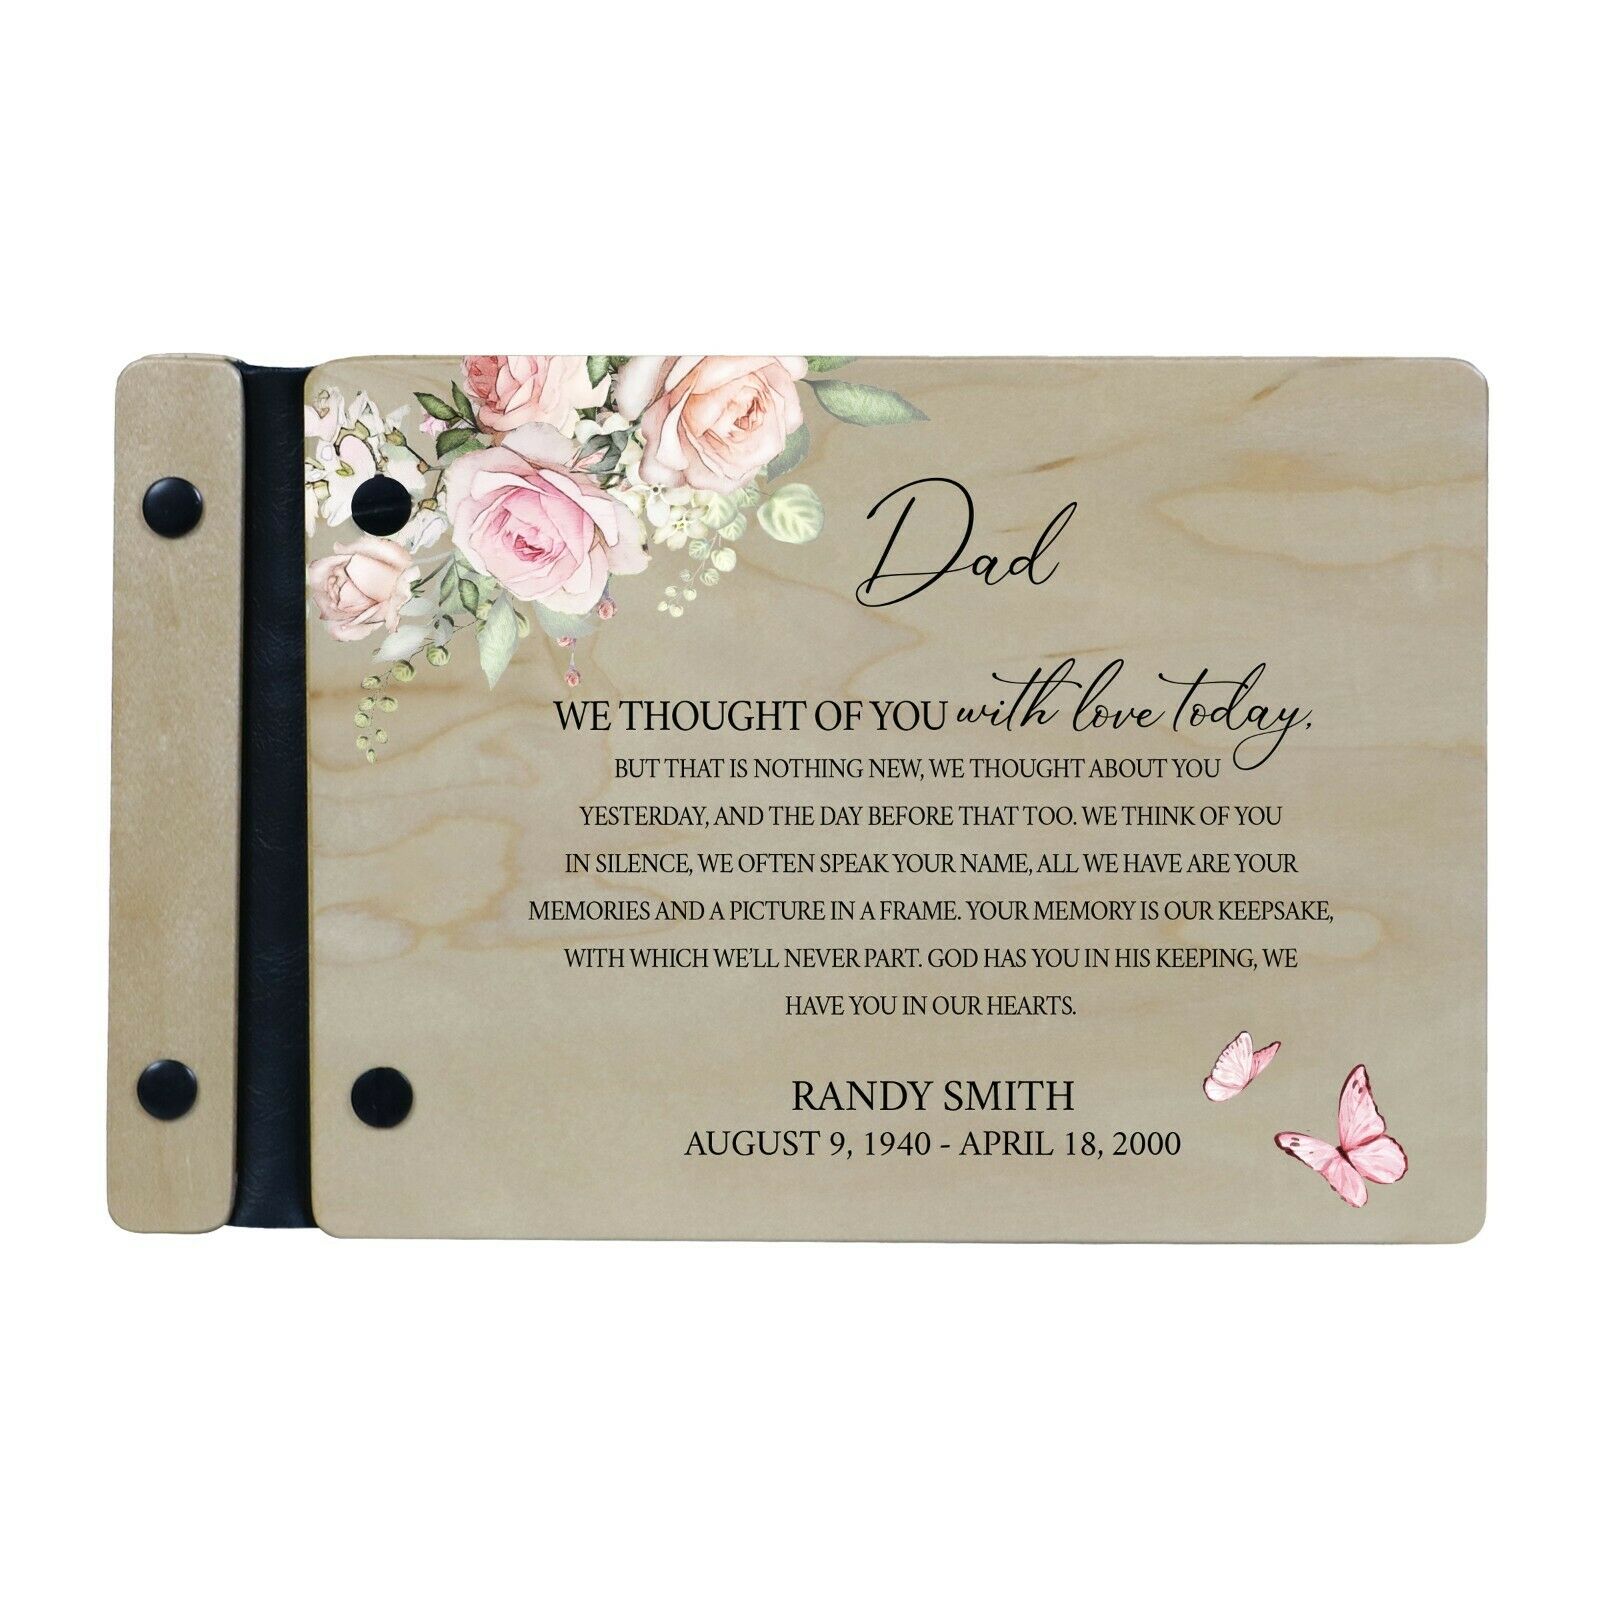 Custom Memorial Funeral Guest Book For Loss Of Loved One 9x6 - We Thought You